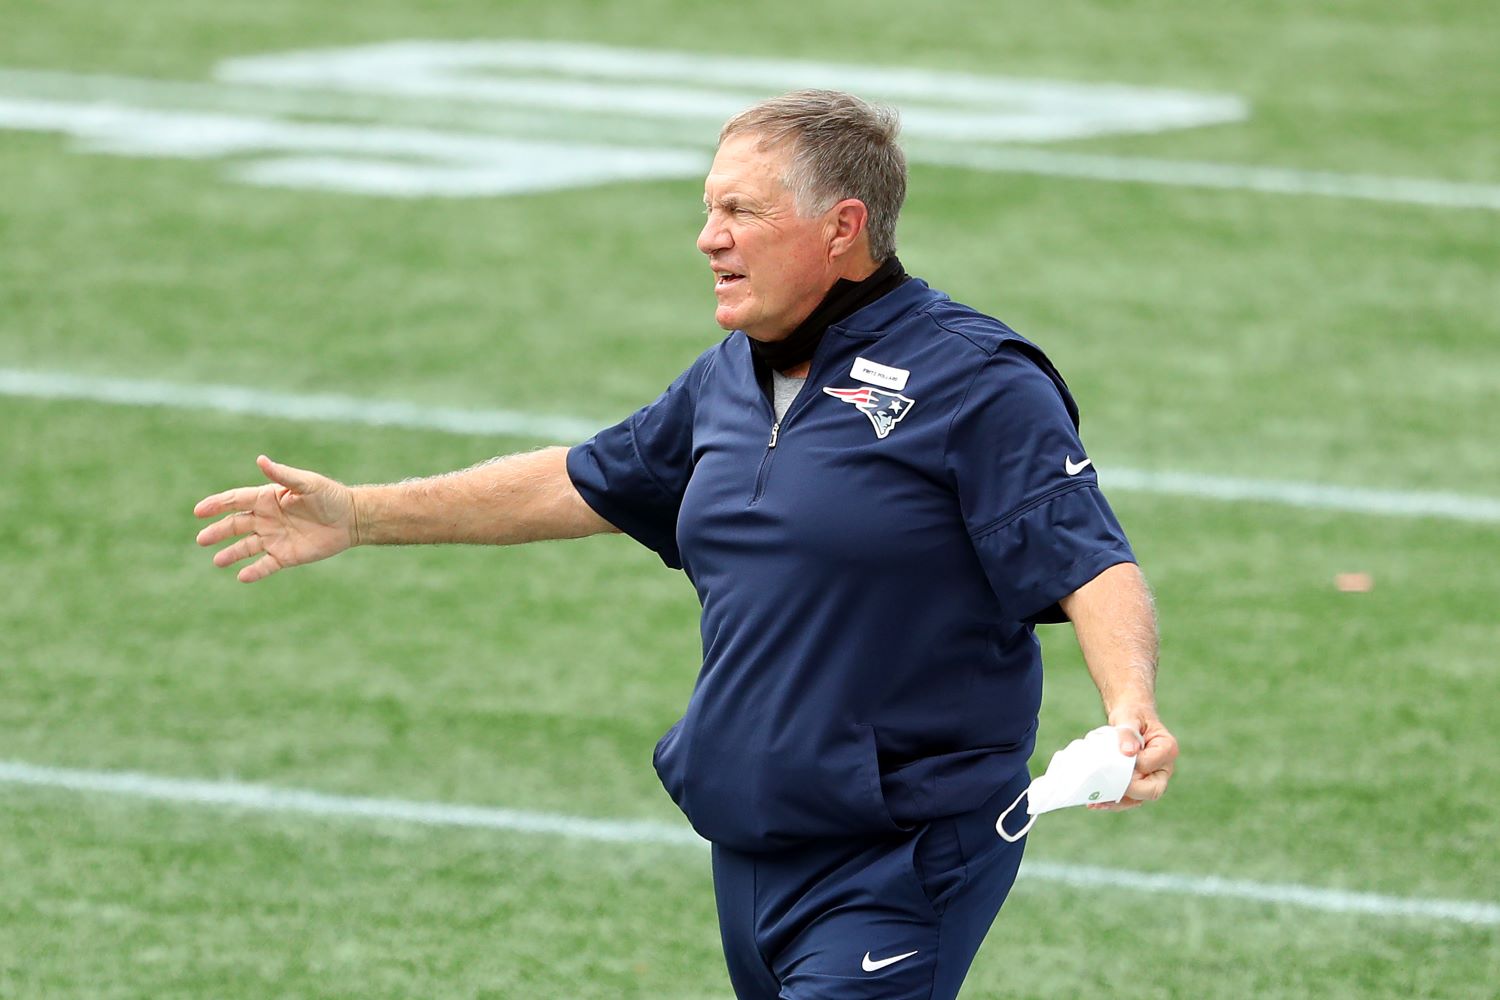 Bill Belichick says the Patriots "sold out" to win three Super Bowl titles, but his incompetence has ruined New England's roster.